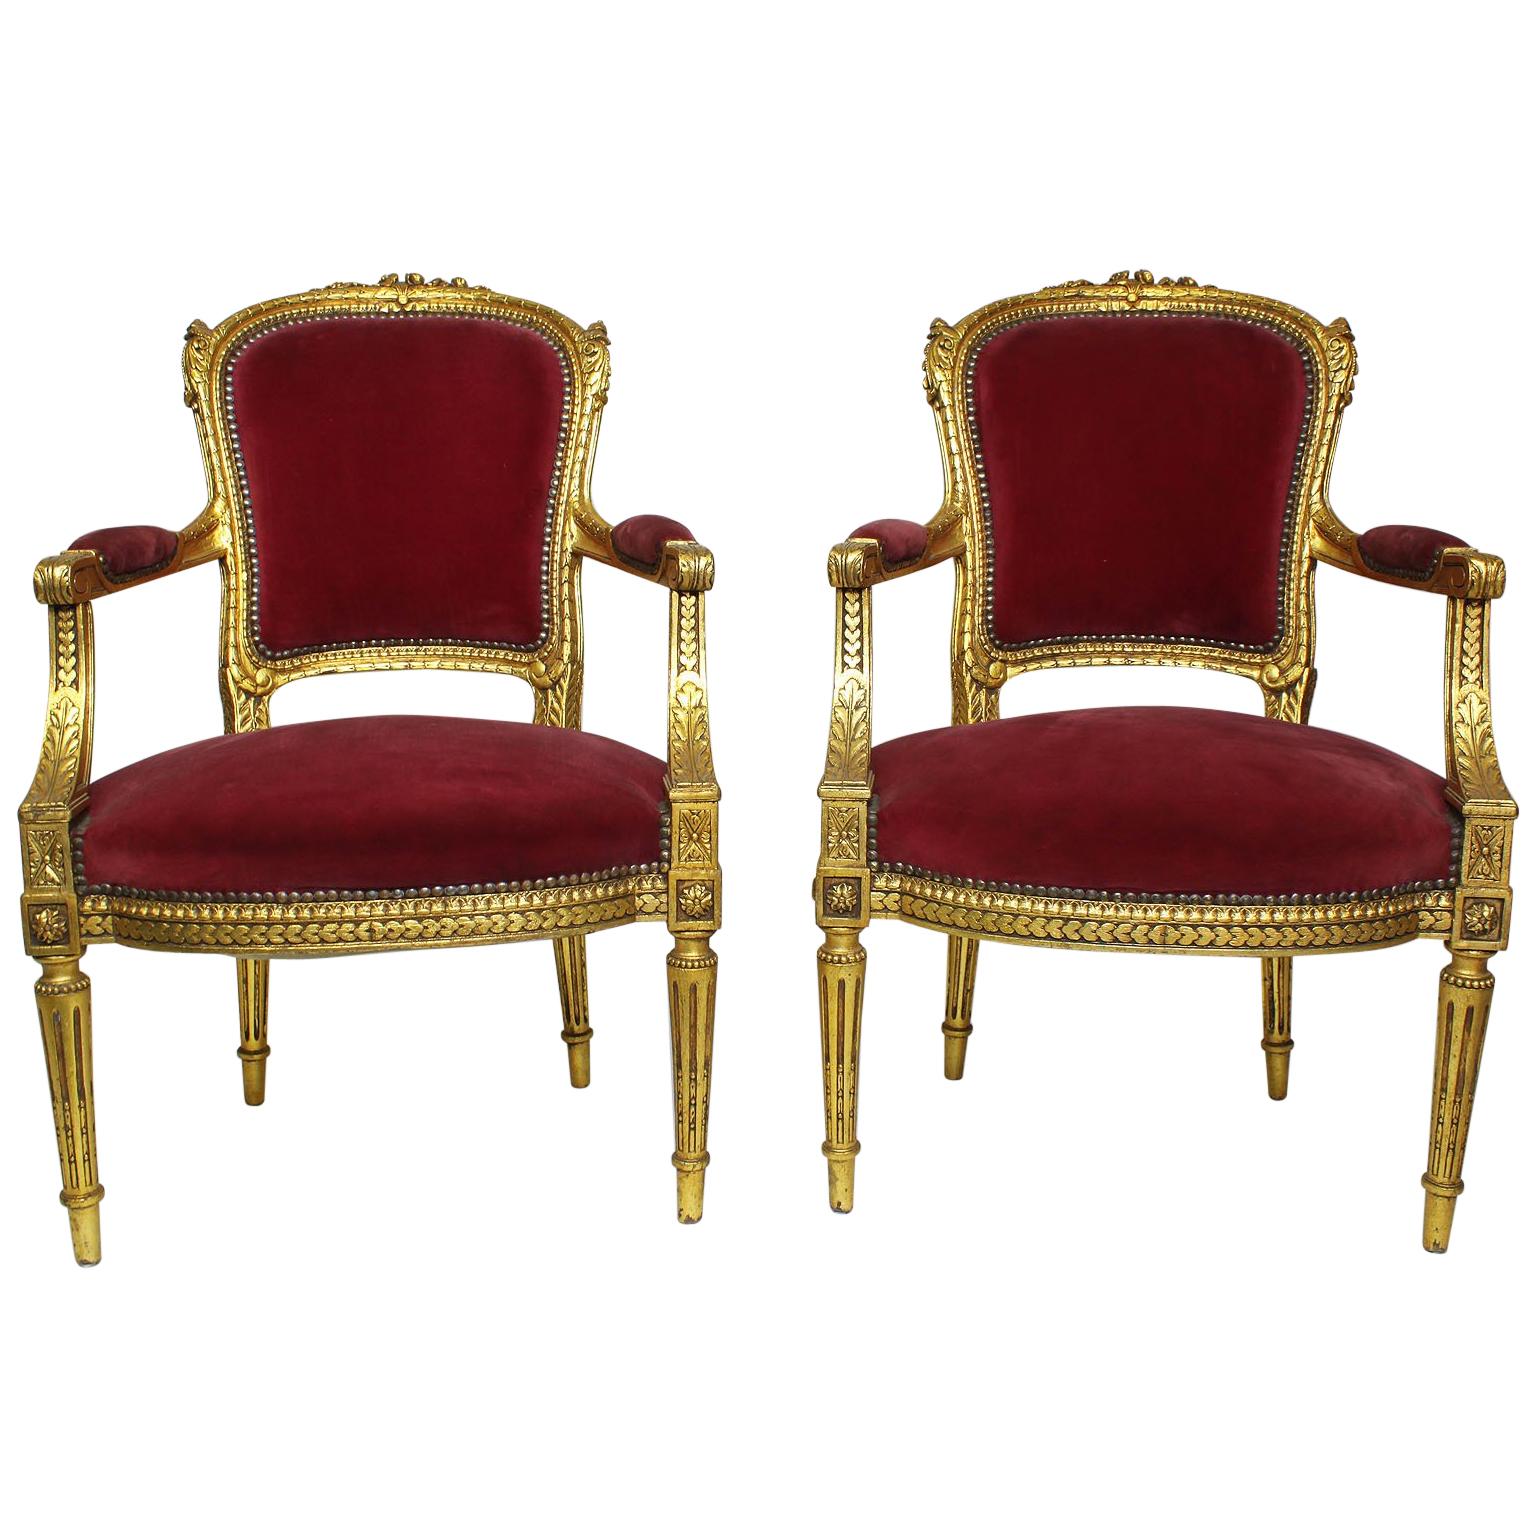 Pair of French Louis XVI Style Giltwood Carved Rococo Fauteuils Armchairs